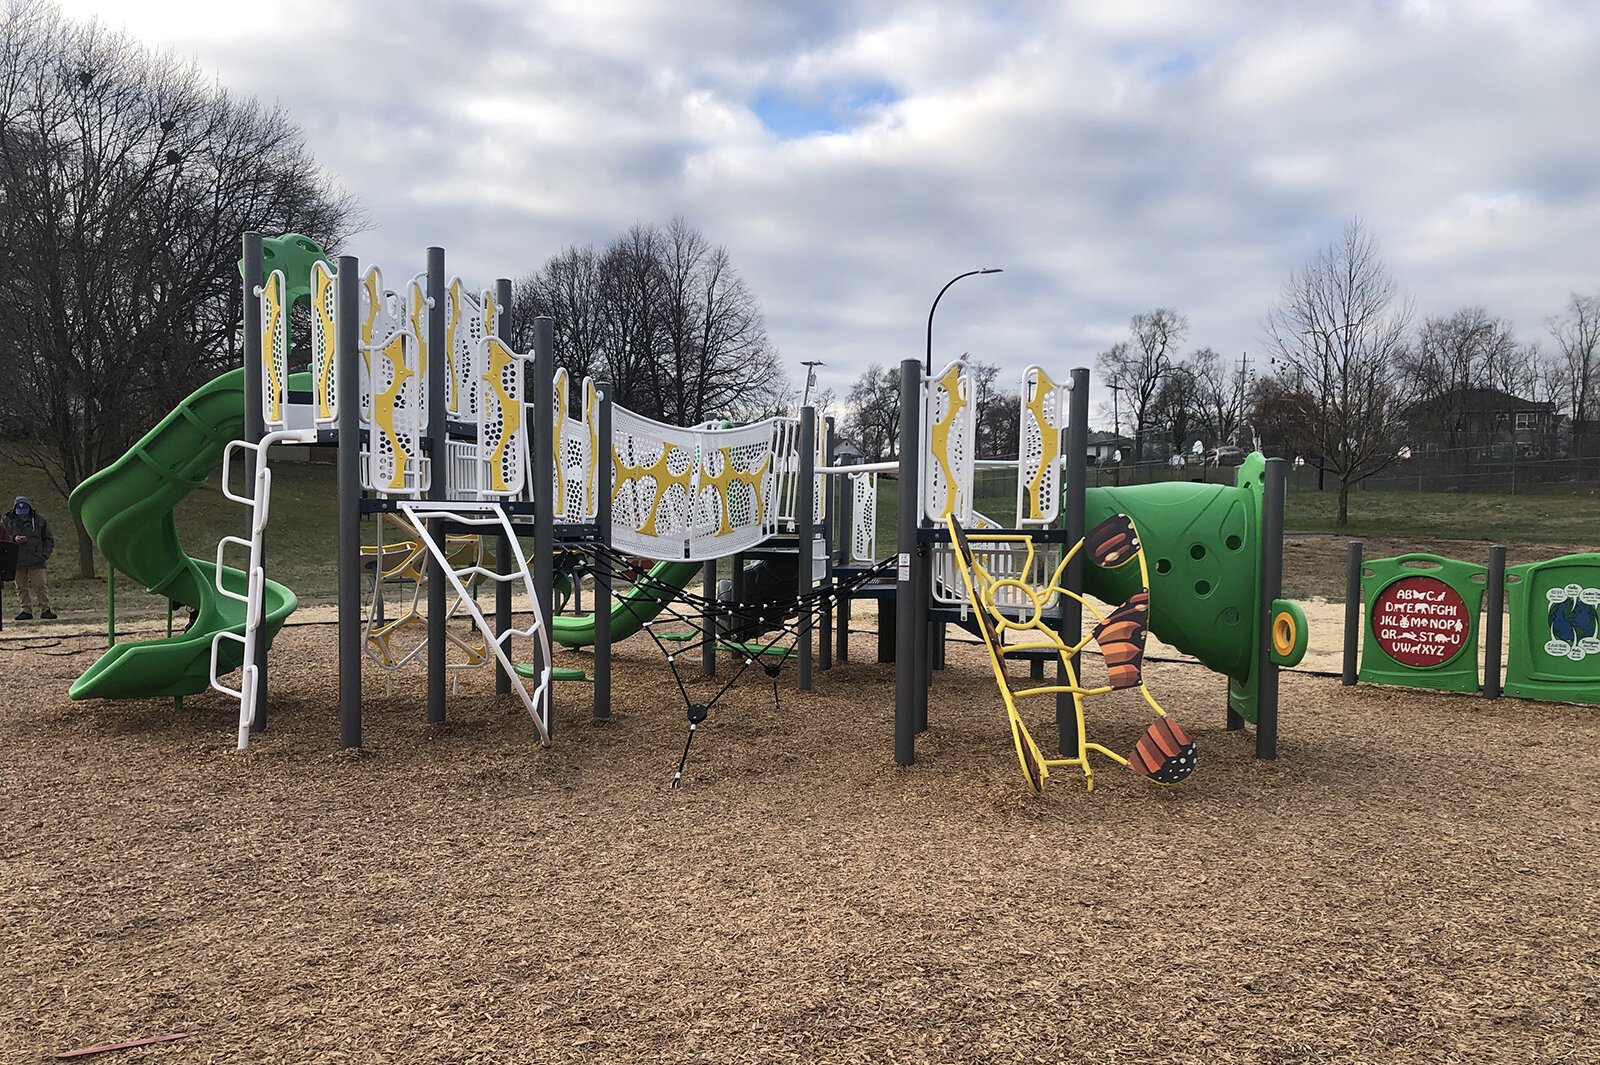 Community feedback sessions led to Community Development Block Grant funds being used to improve the Parkridge Park playground last year.